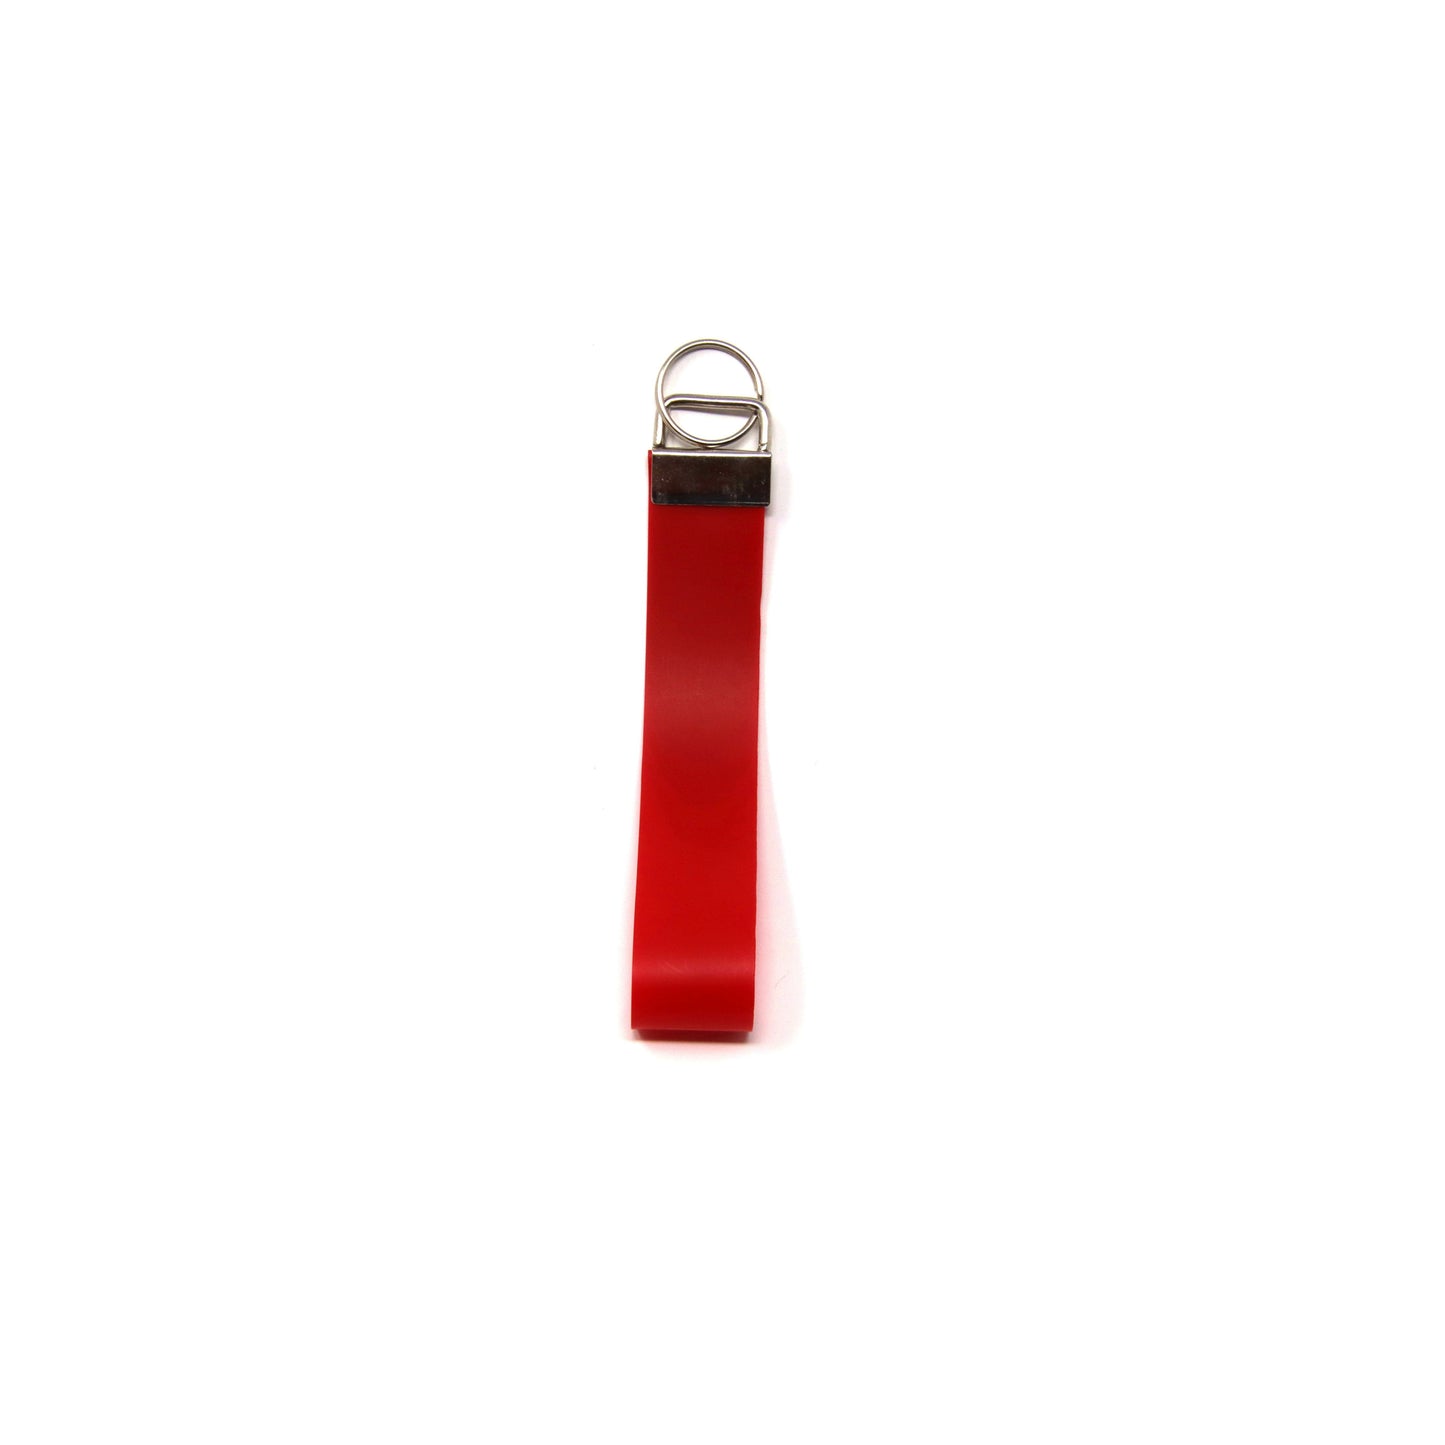 6 inch Red Jelly Wristlet Key Chain